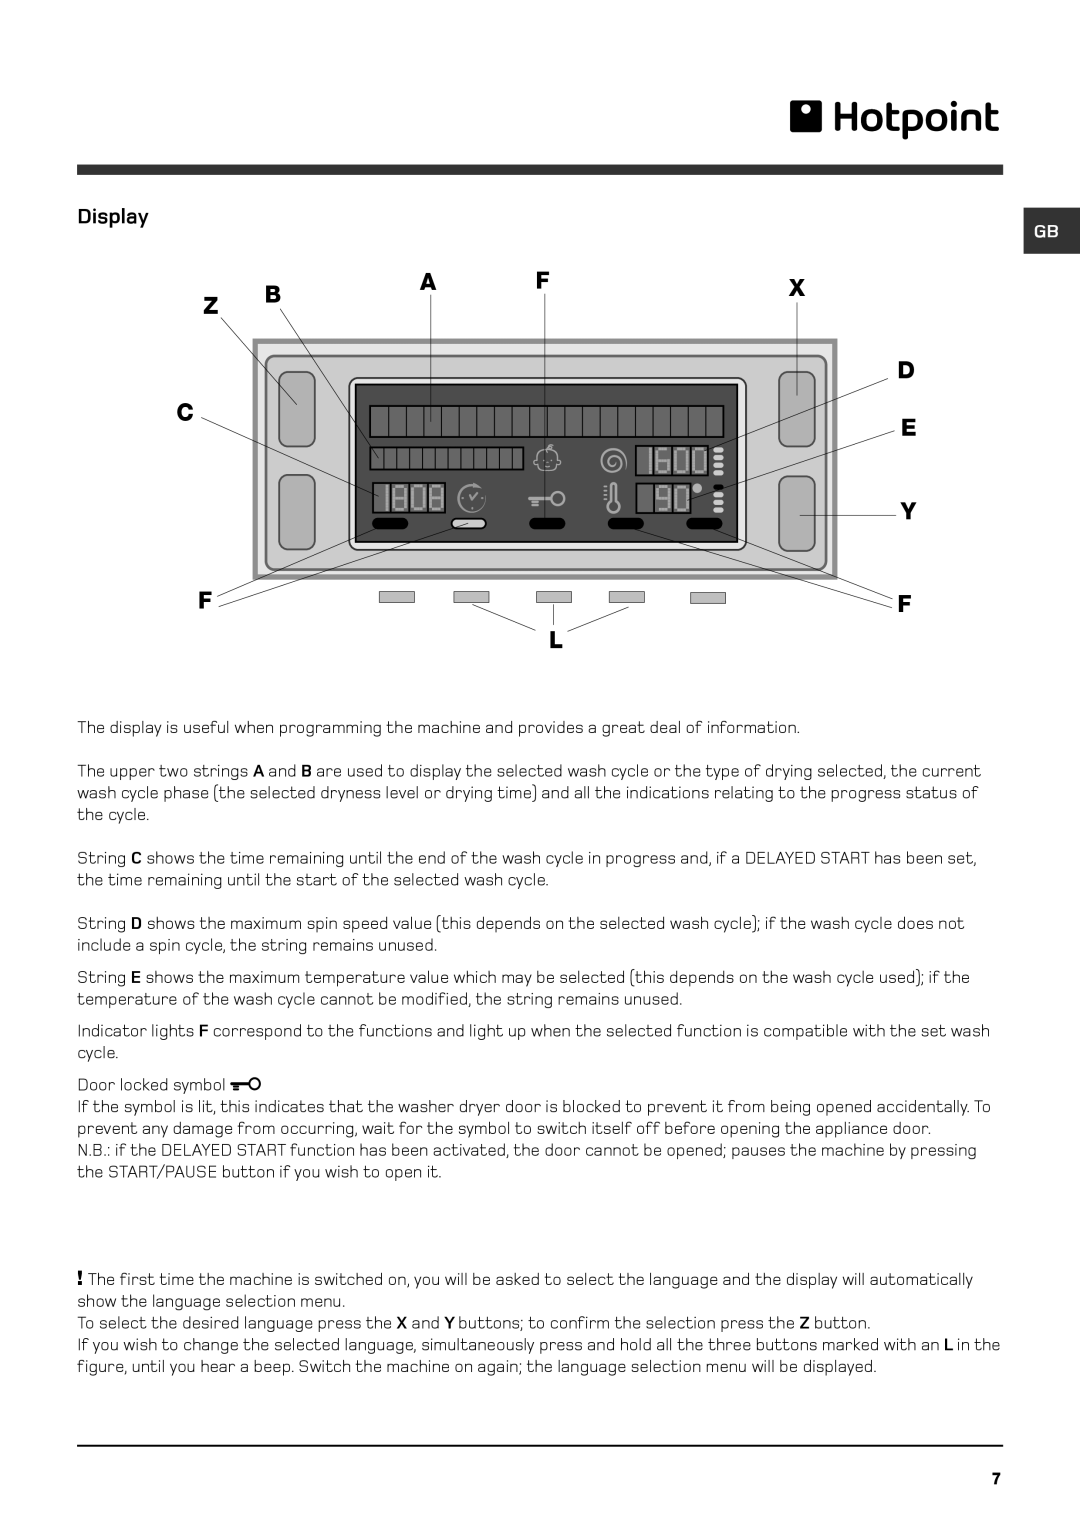 Hotpoint WDD instruction manual Display 